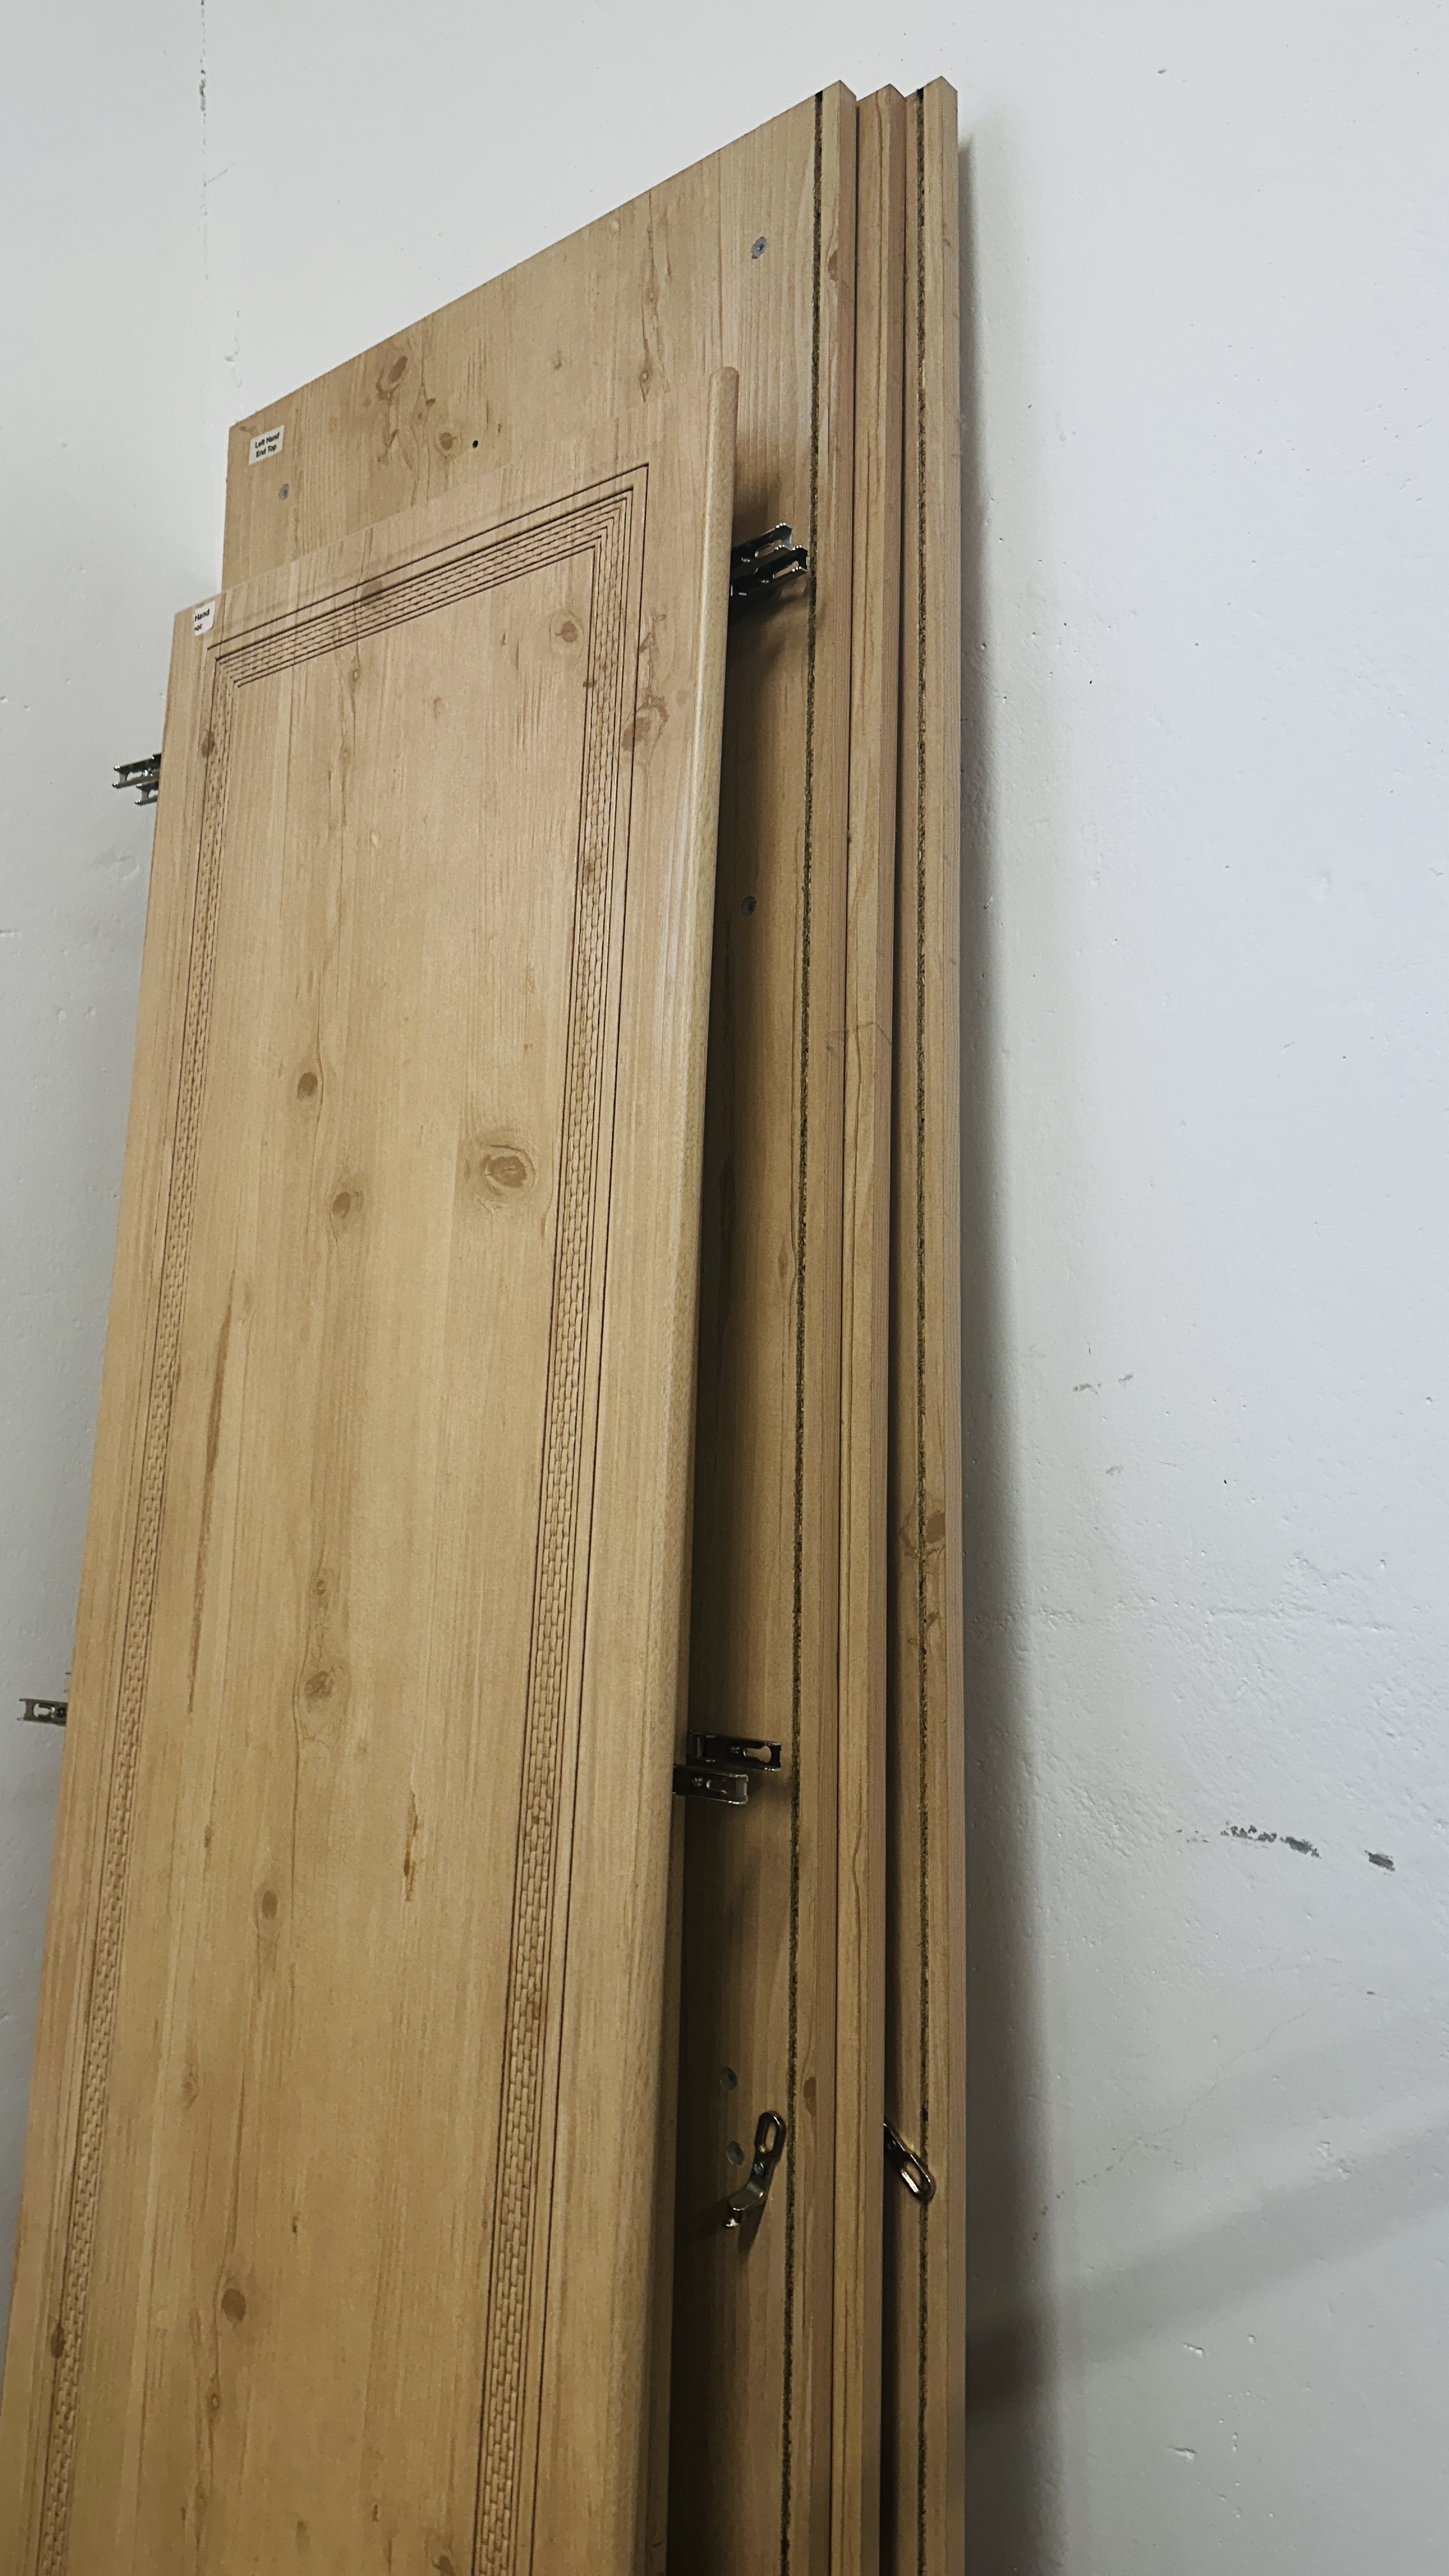 AN ALSTONS OYSTER BAY MODERN LIMED FINISH FOUR DOOR WARDROBE (FLATPACKED) - APPROX 184CM WIDE. - Image 2 of 3